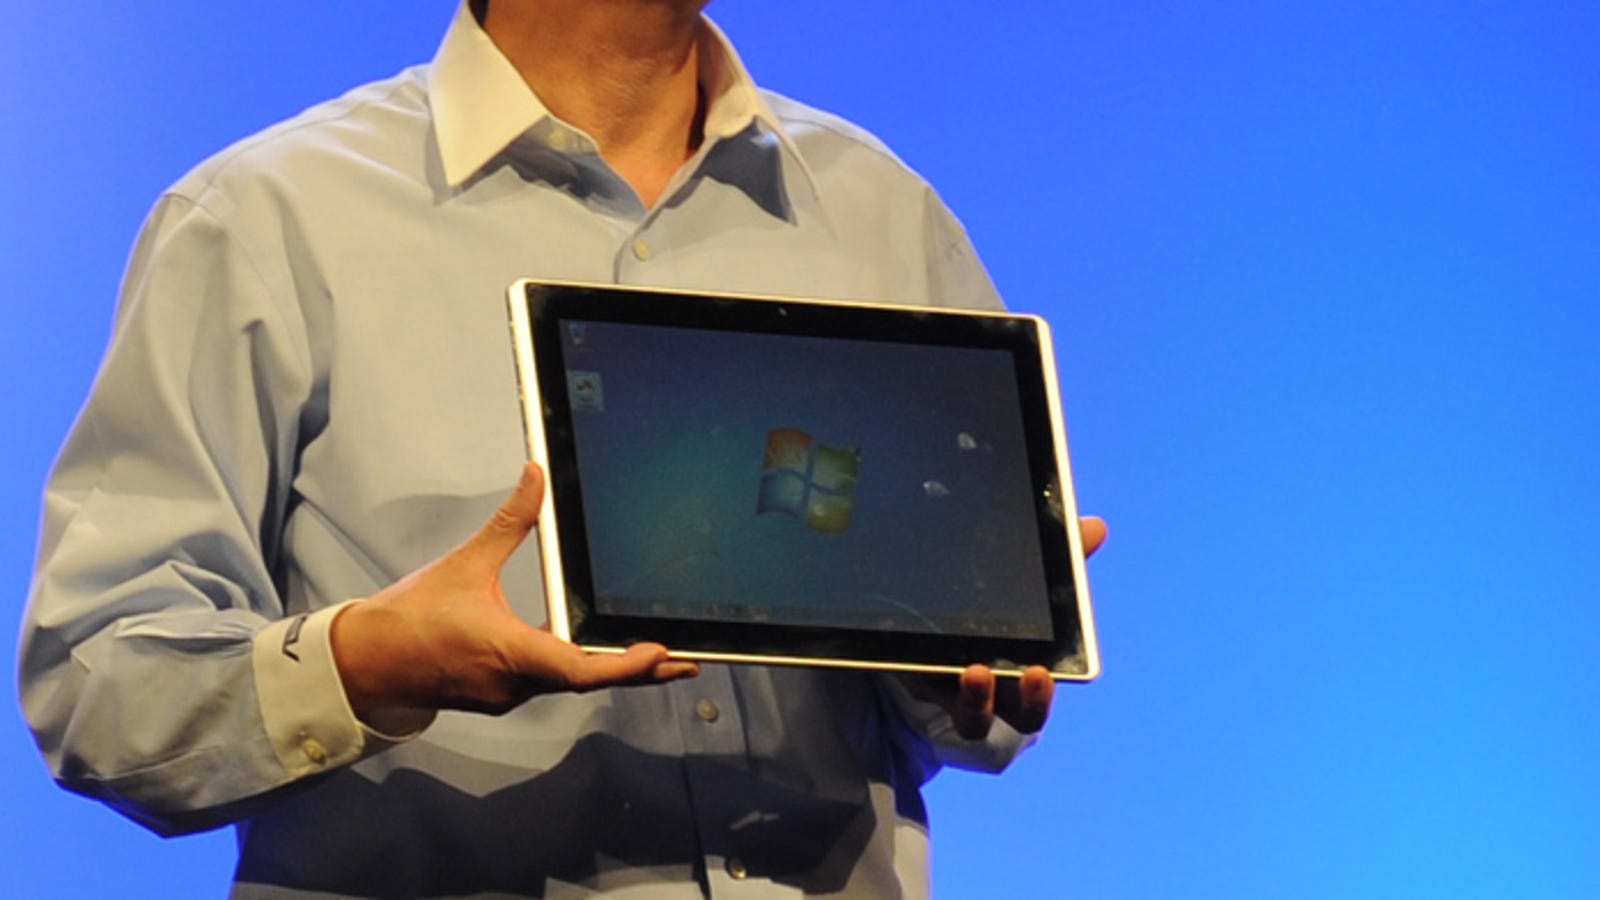 Asus "This Is the Most Powerful Tablet in the World"